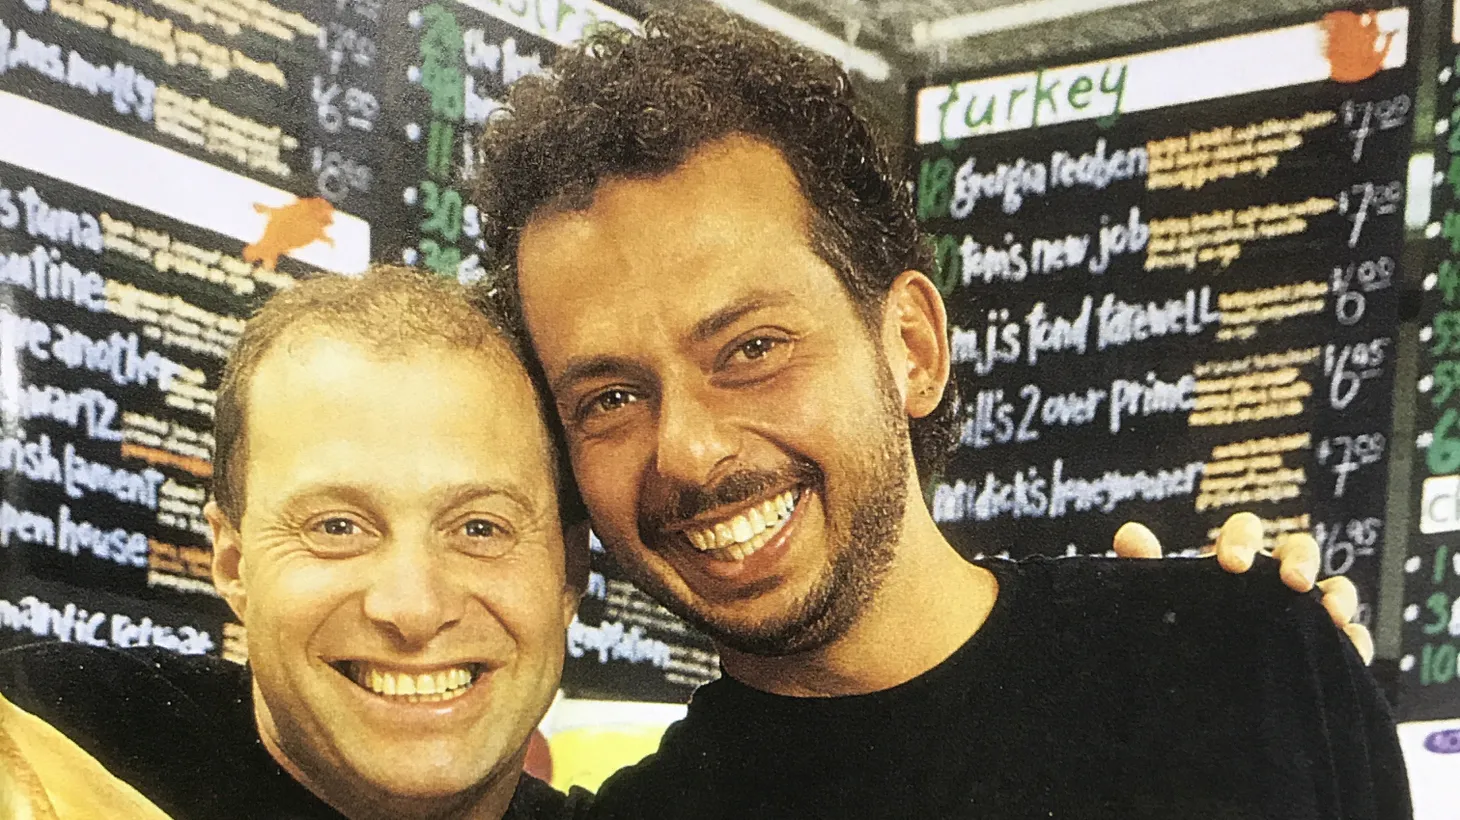 Zingerman’s co-founders Paul Saginaw (left) and Ari Weinzweig brought the Jewish deli tradition to Ann Arbor in 1982.